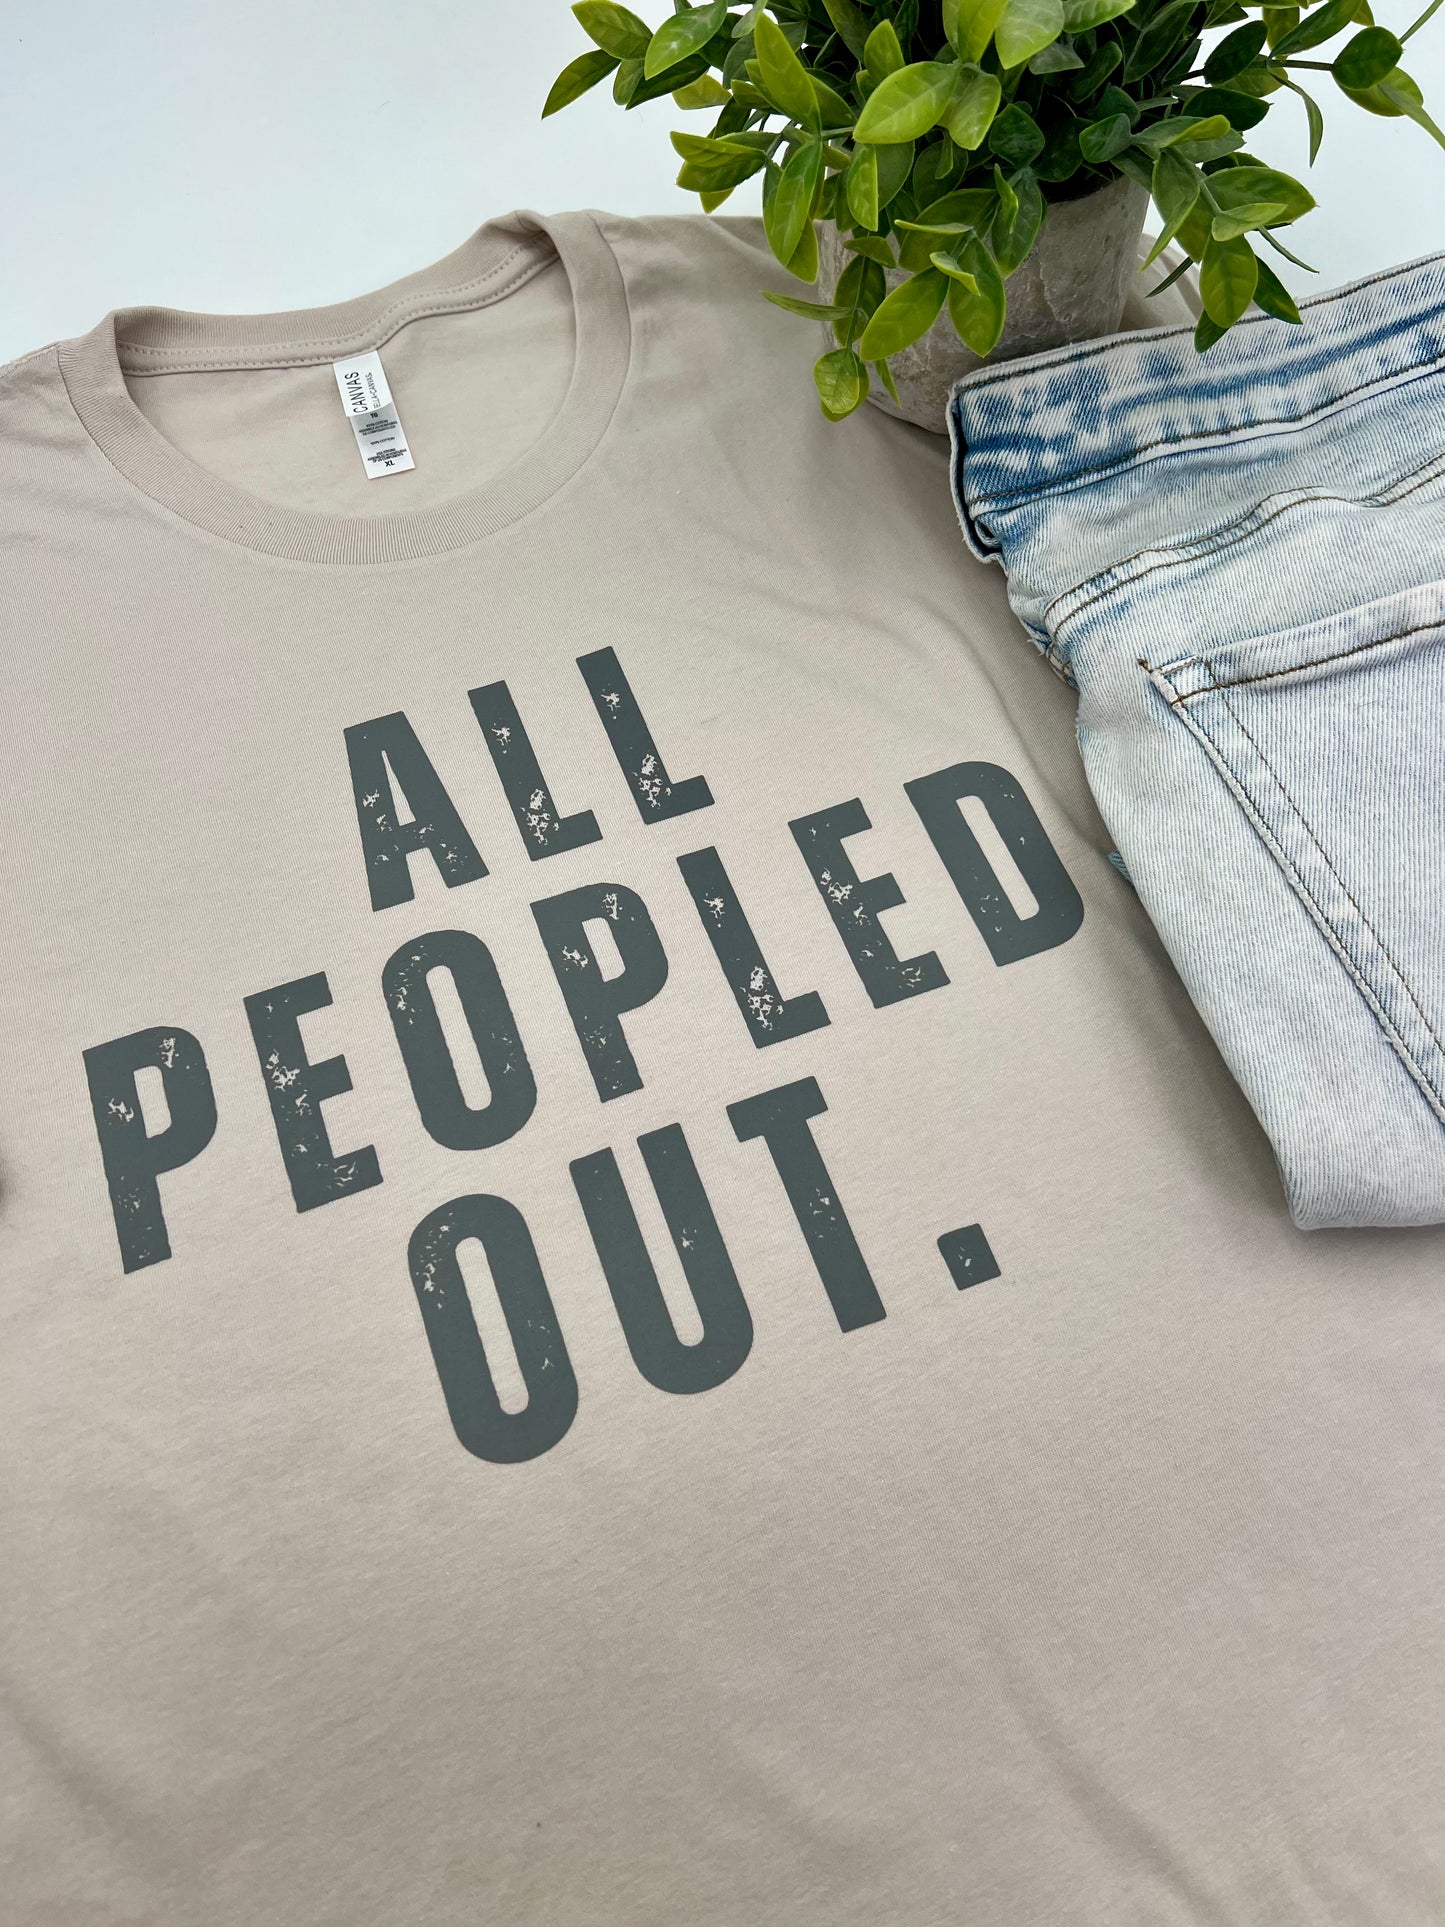 ALL PEOPLED OUT. Unisex shirt in HEATHER DUST